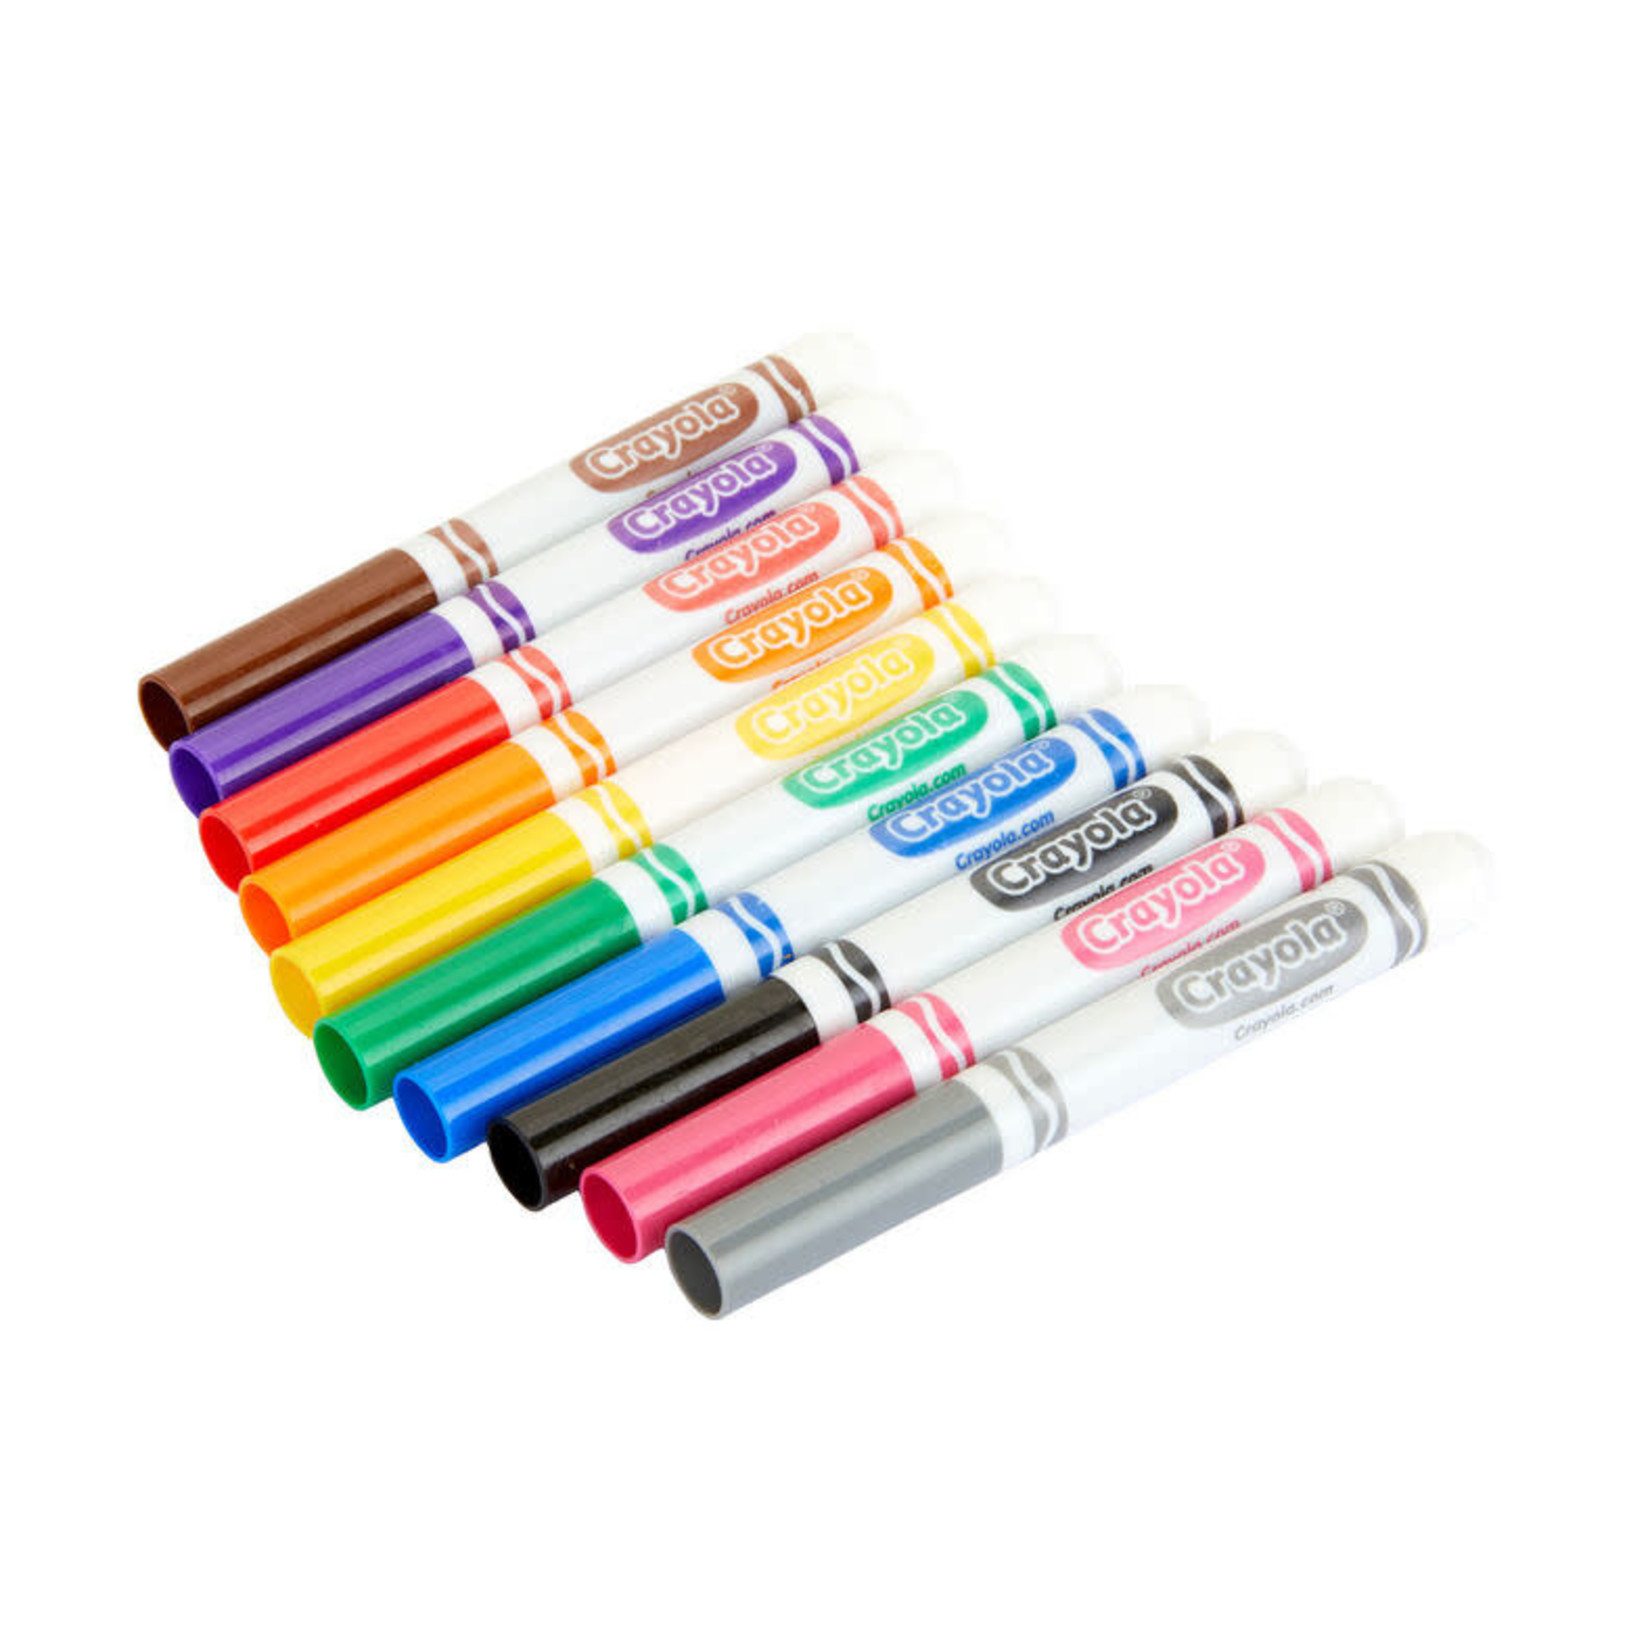 Crayola Broad Line Markers, Classic Colors, 10 Count